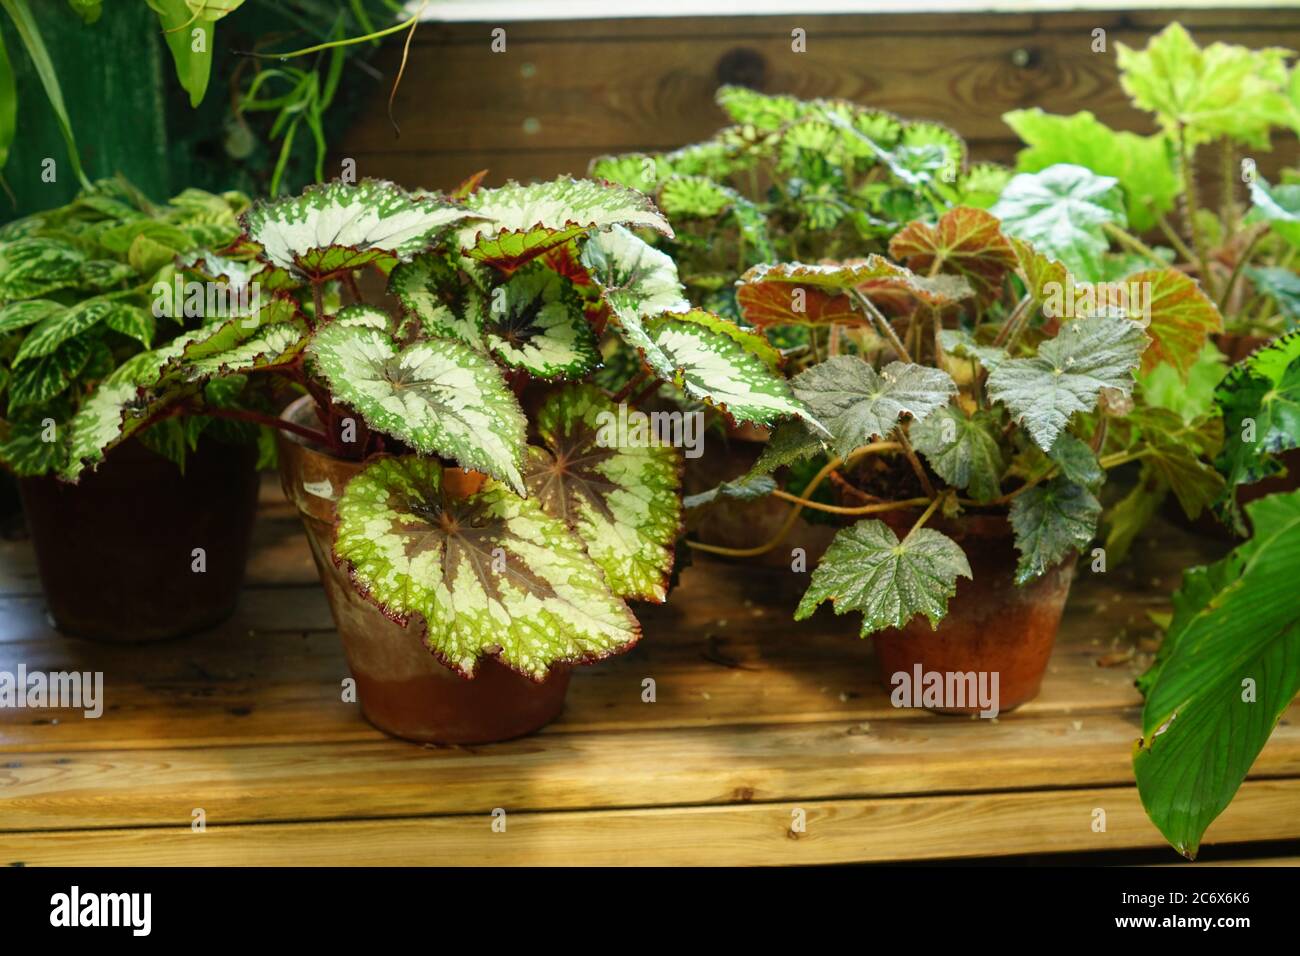 variety of begonia plants in a flower pots on wooden shelf Stock Photo